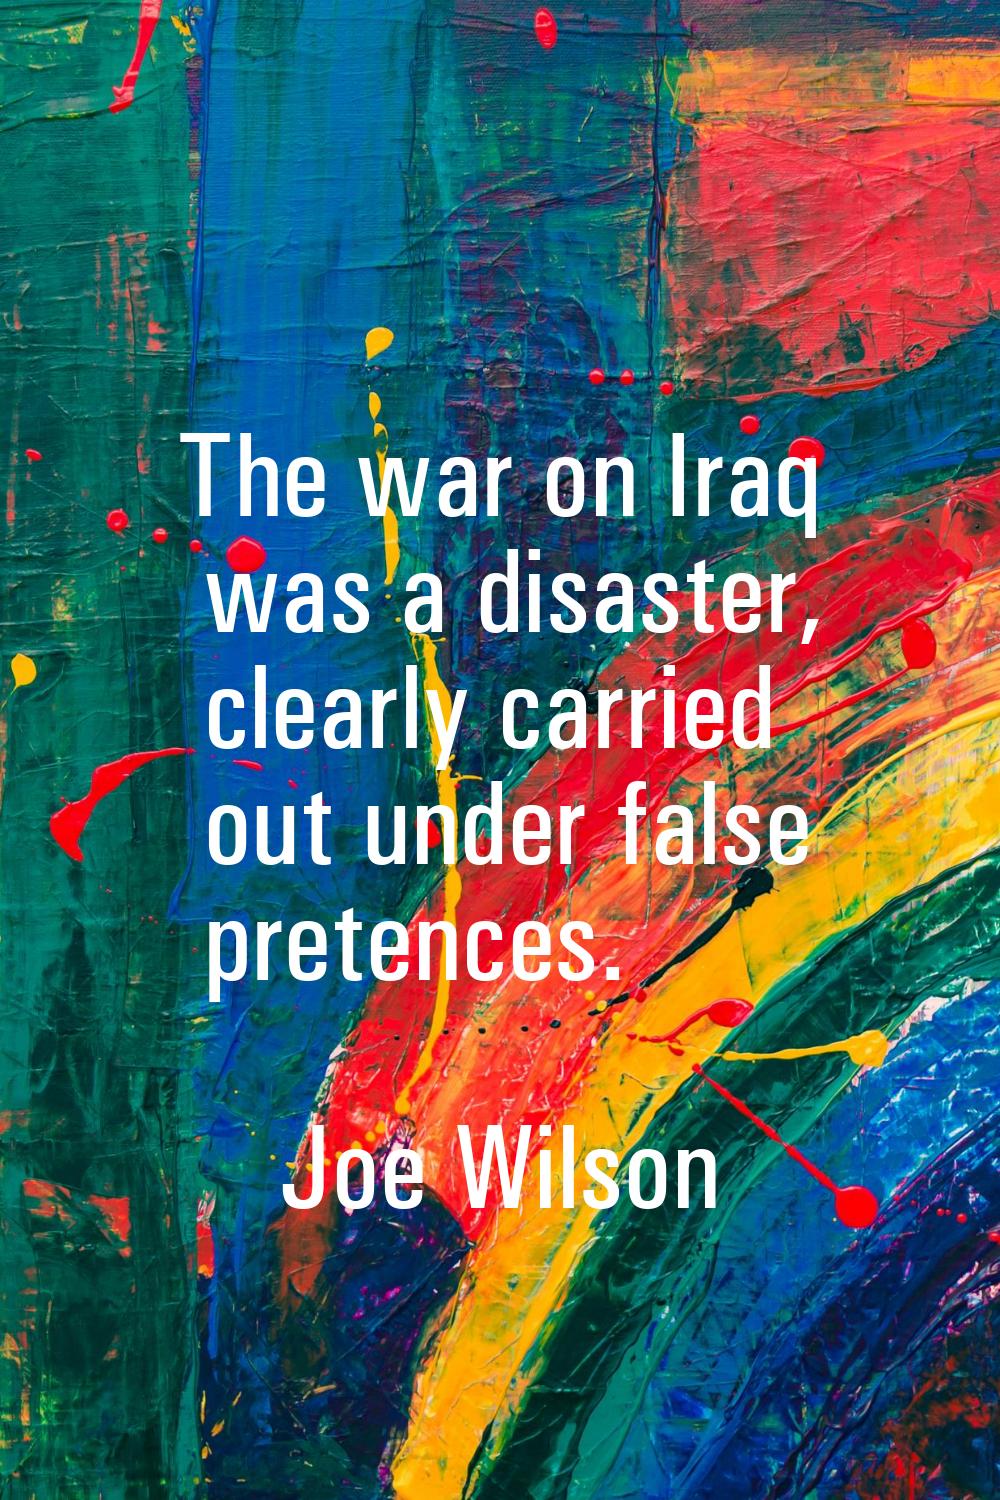 The war on Iraq was a disaster, clearly carried out under false pretences.